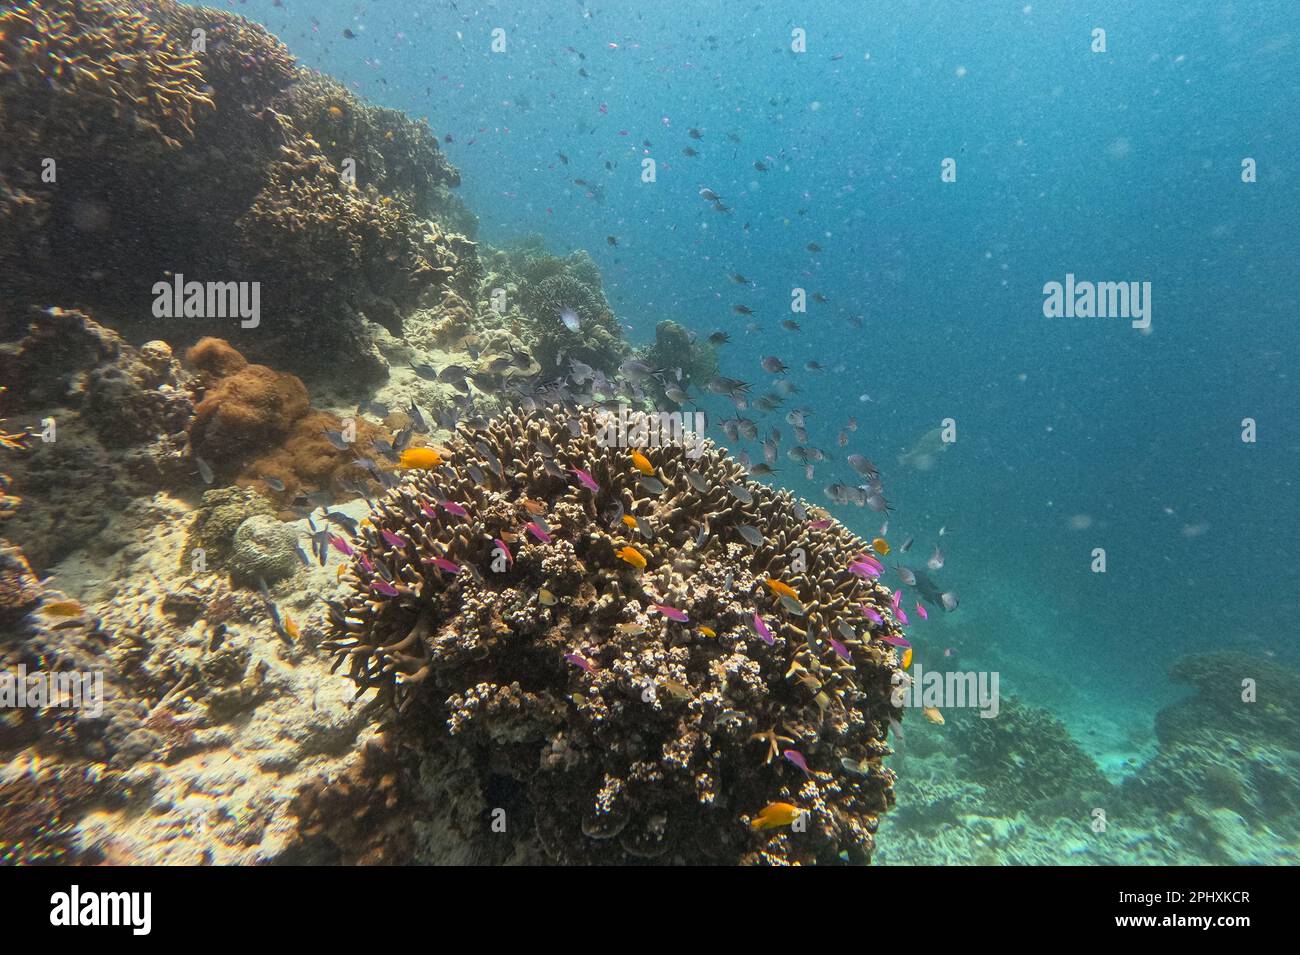 Idyllic shot of a coral reef in Camiguin, Philippines surrounded with fishes. Stock Photo